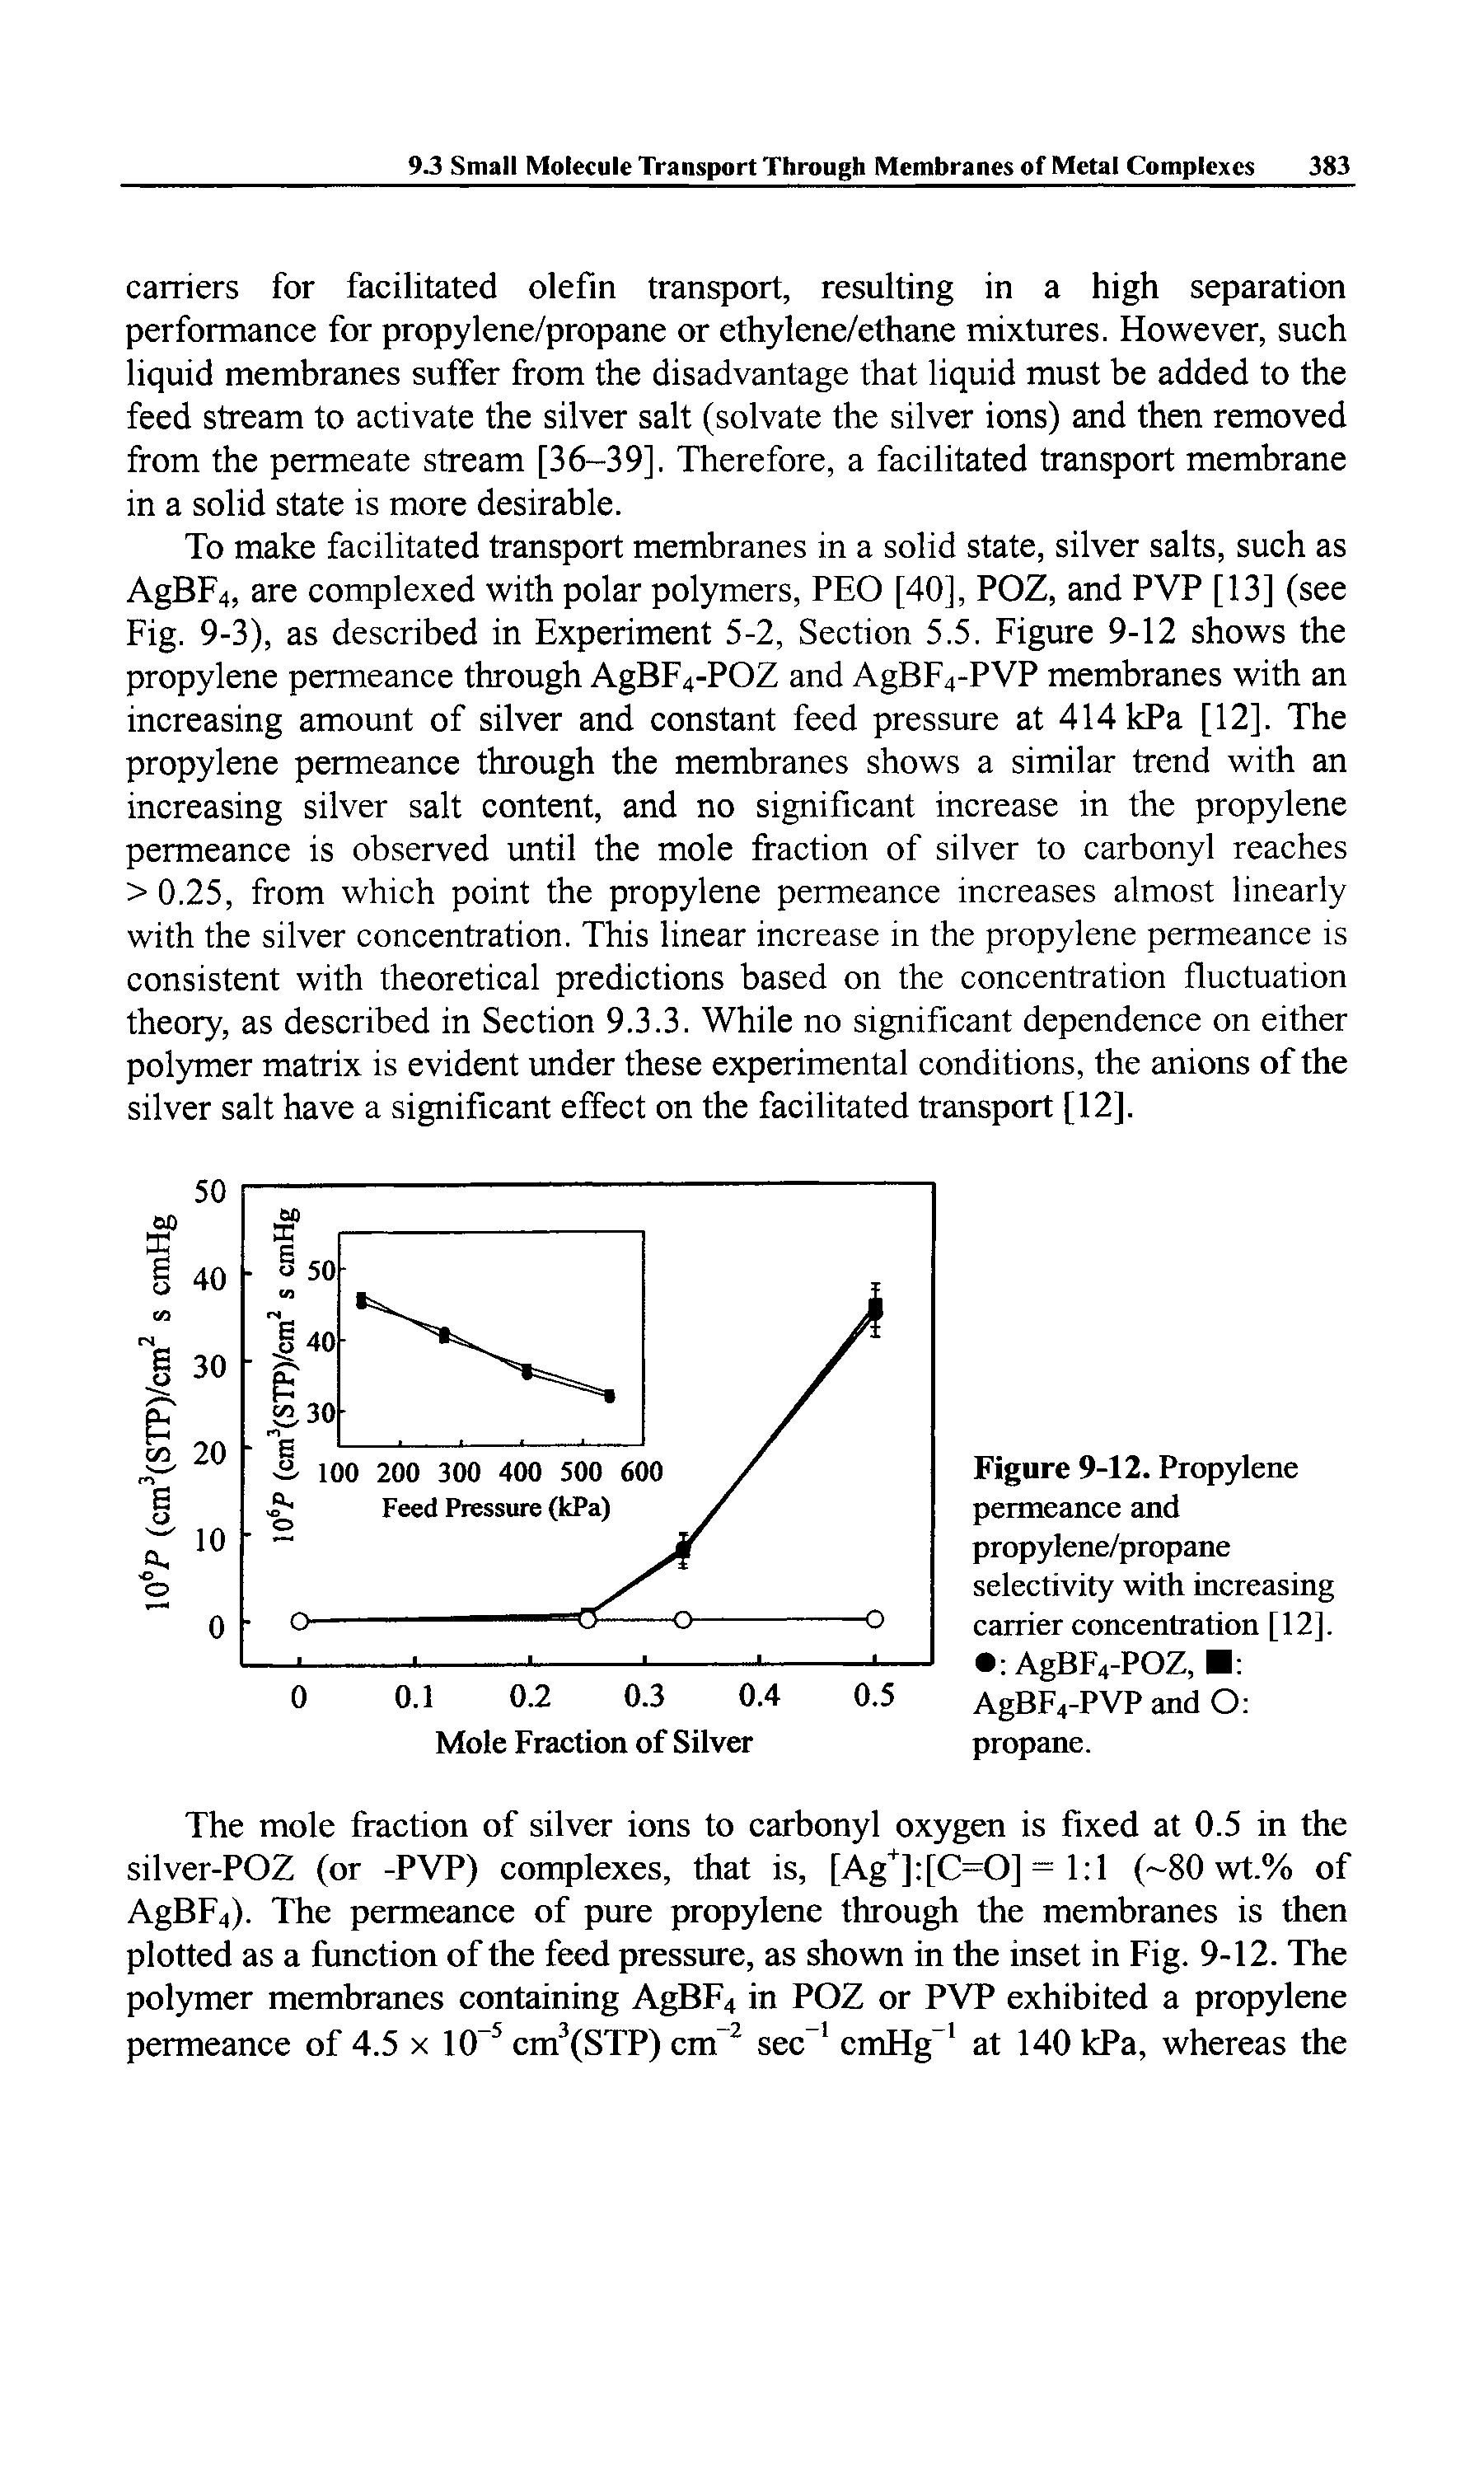 Figure 9-12. Propylene permeance and propylene/propane selectivity with increasing carrier concentration [12]. AgBF4-POZ, AgBF4-PVP and O propane.